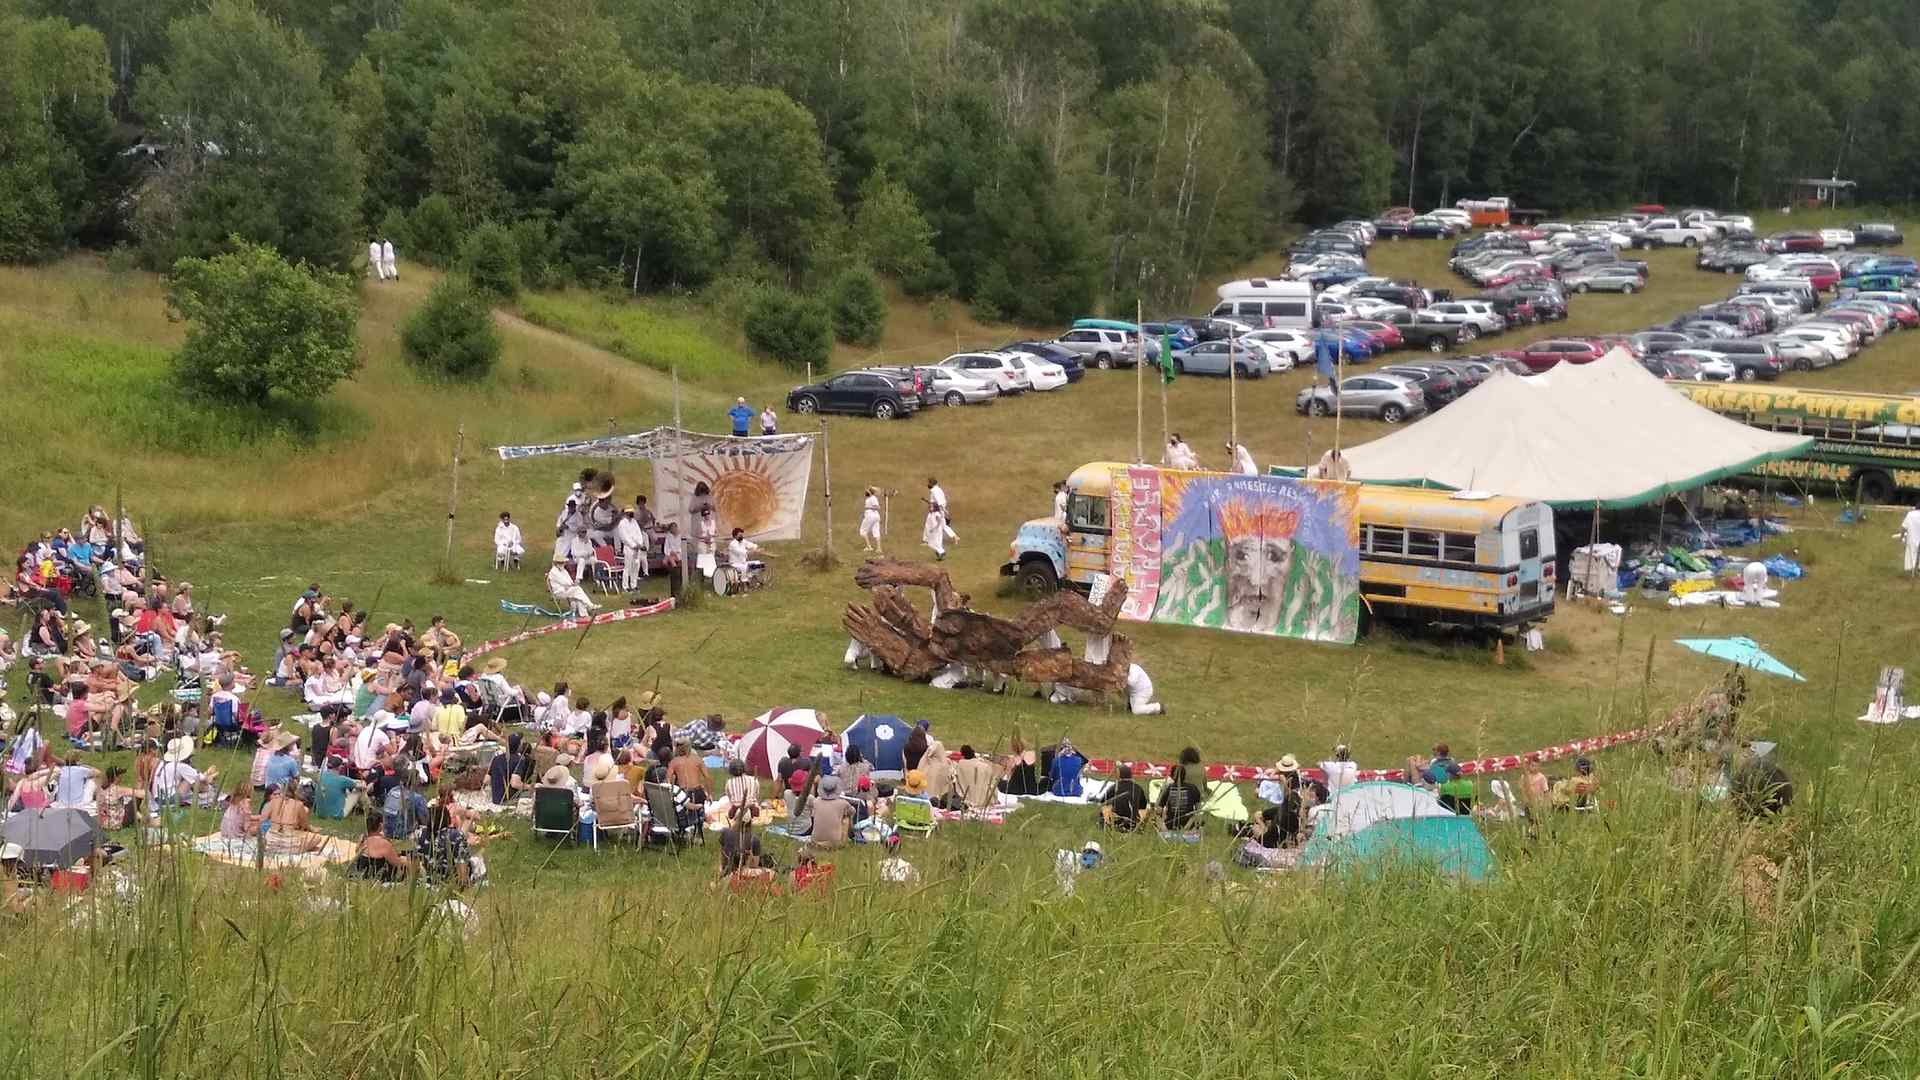 This image shows a grassy field, parked cars, and an audience seated in the grass, illustrating that Bread and Puppet takes place on a rural farm in Vermont